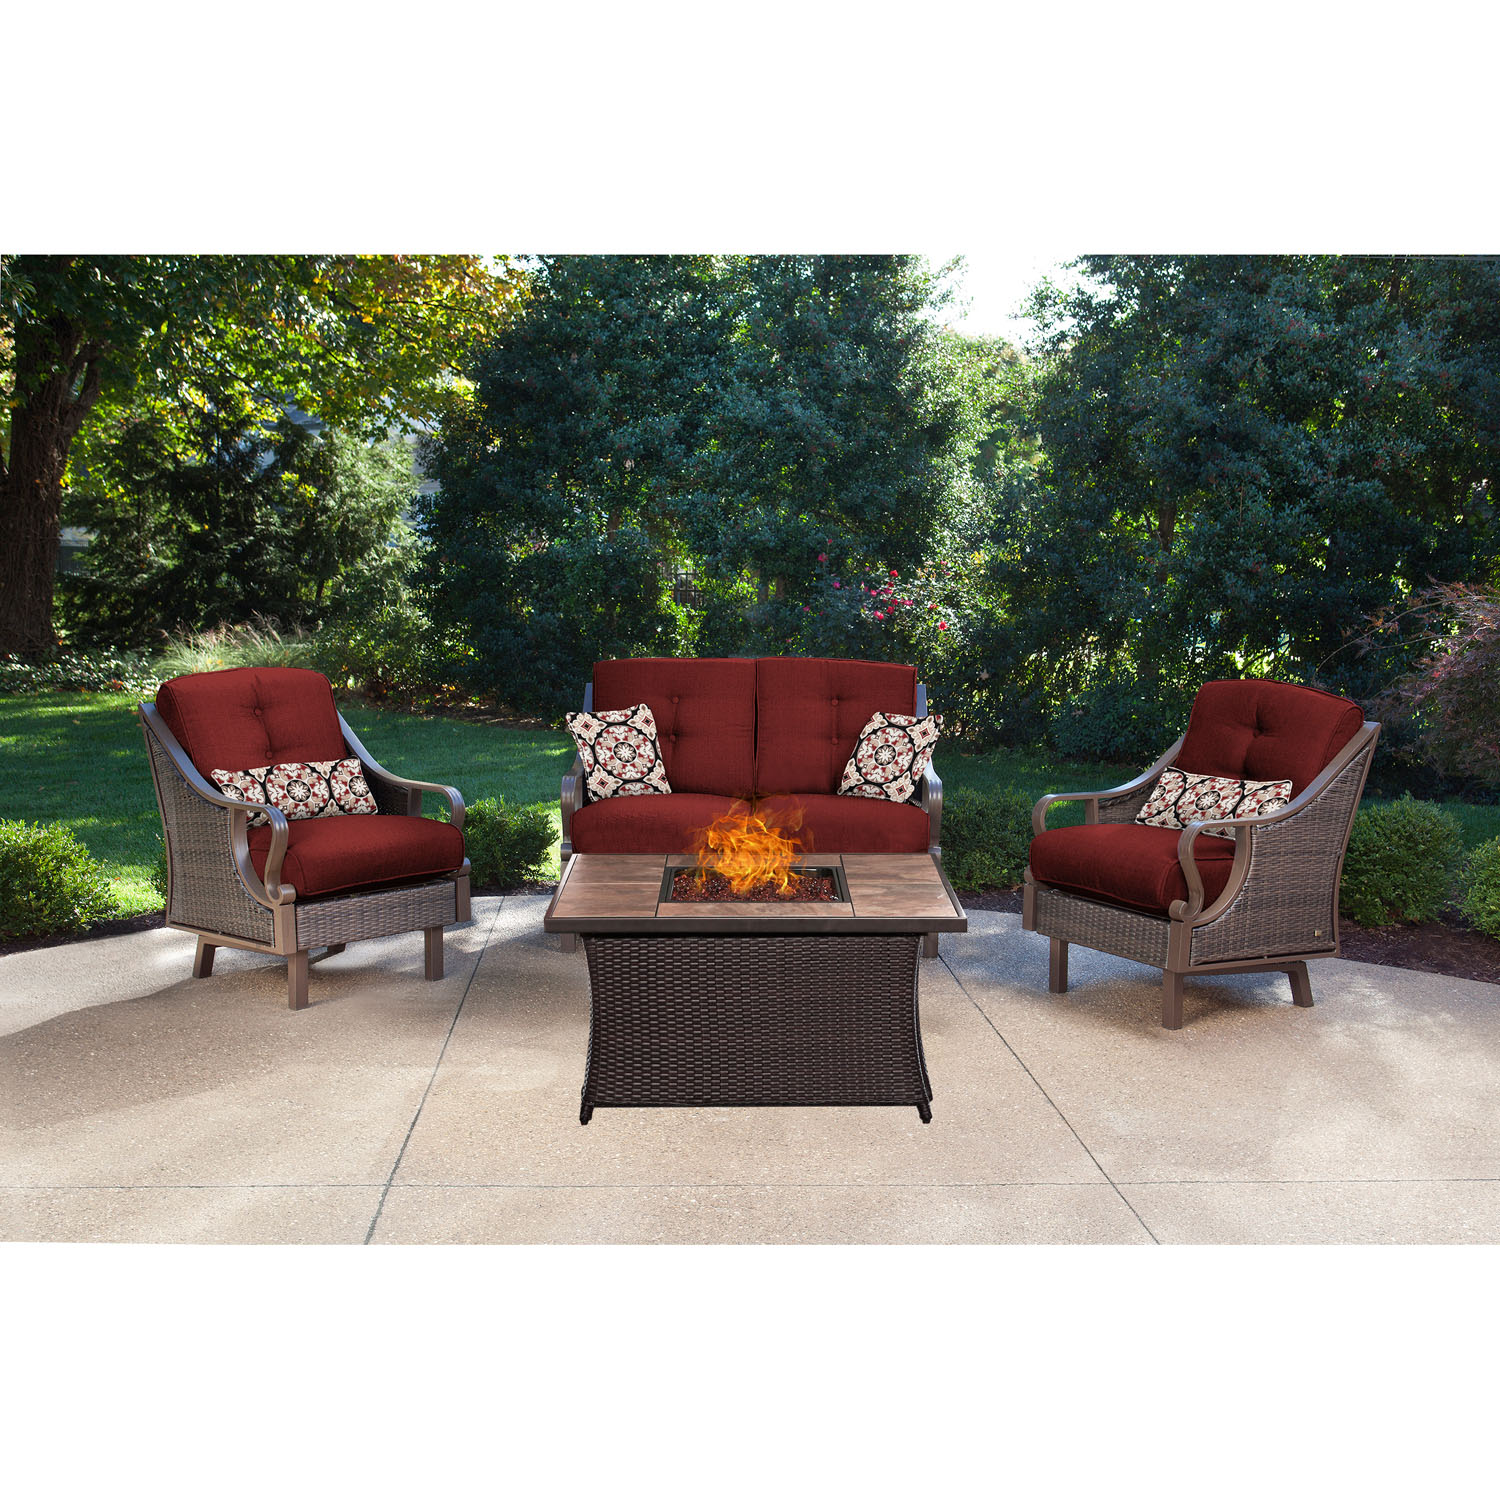 Hanover Ventura 4 Pcs Wicker and Steel Propane Fire Pit Chat Set, Crimson Red - image 3 of 11